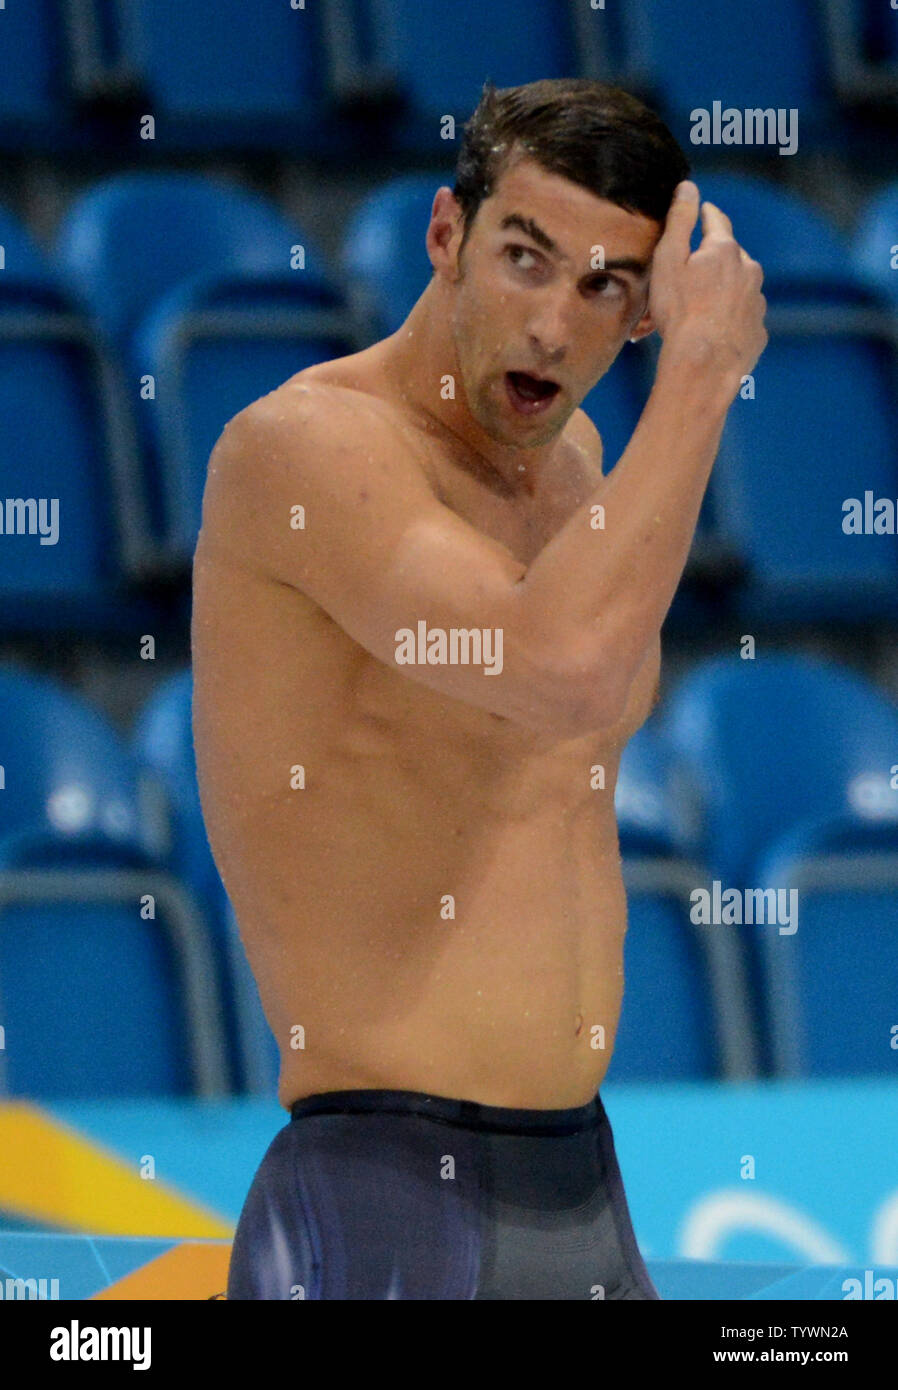 USA's Michael Phelps looks up the clock as he finishes fourth and out of the medals in the Men's 400 Individual Medley Final at the Aquatics Center during the London 2012 Summer Olympics in Stratford, London on July 28, 2012.    Phelps won eight gold medals in Beijing.   UPI/Pat Benic Stock Photo